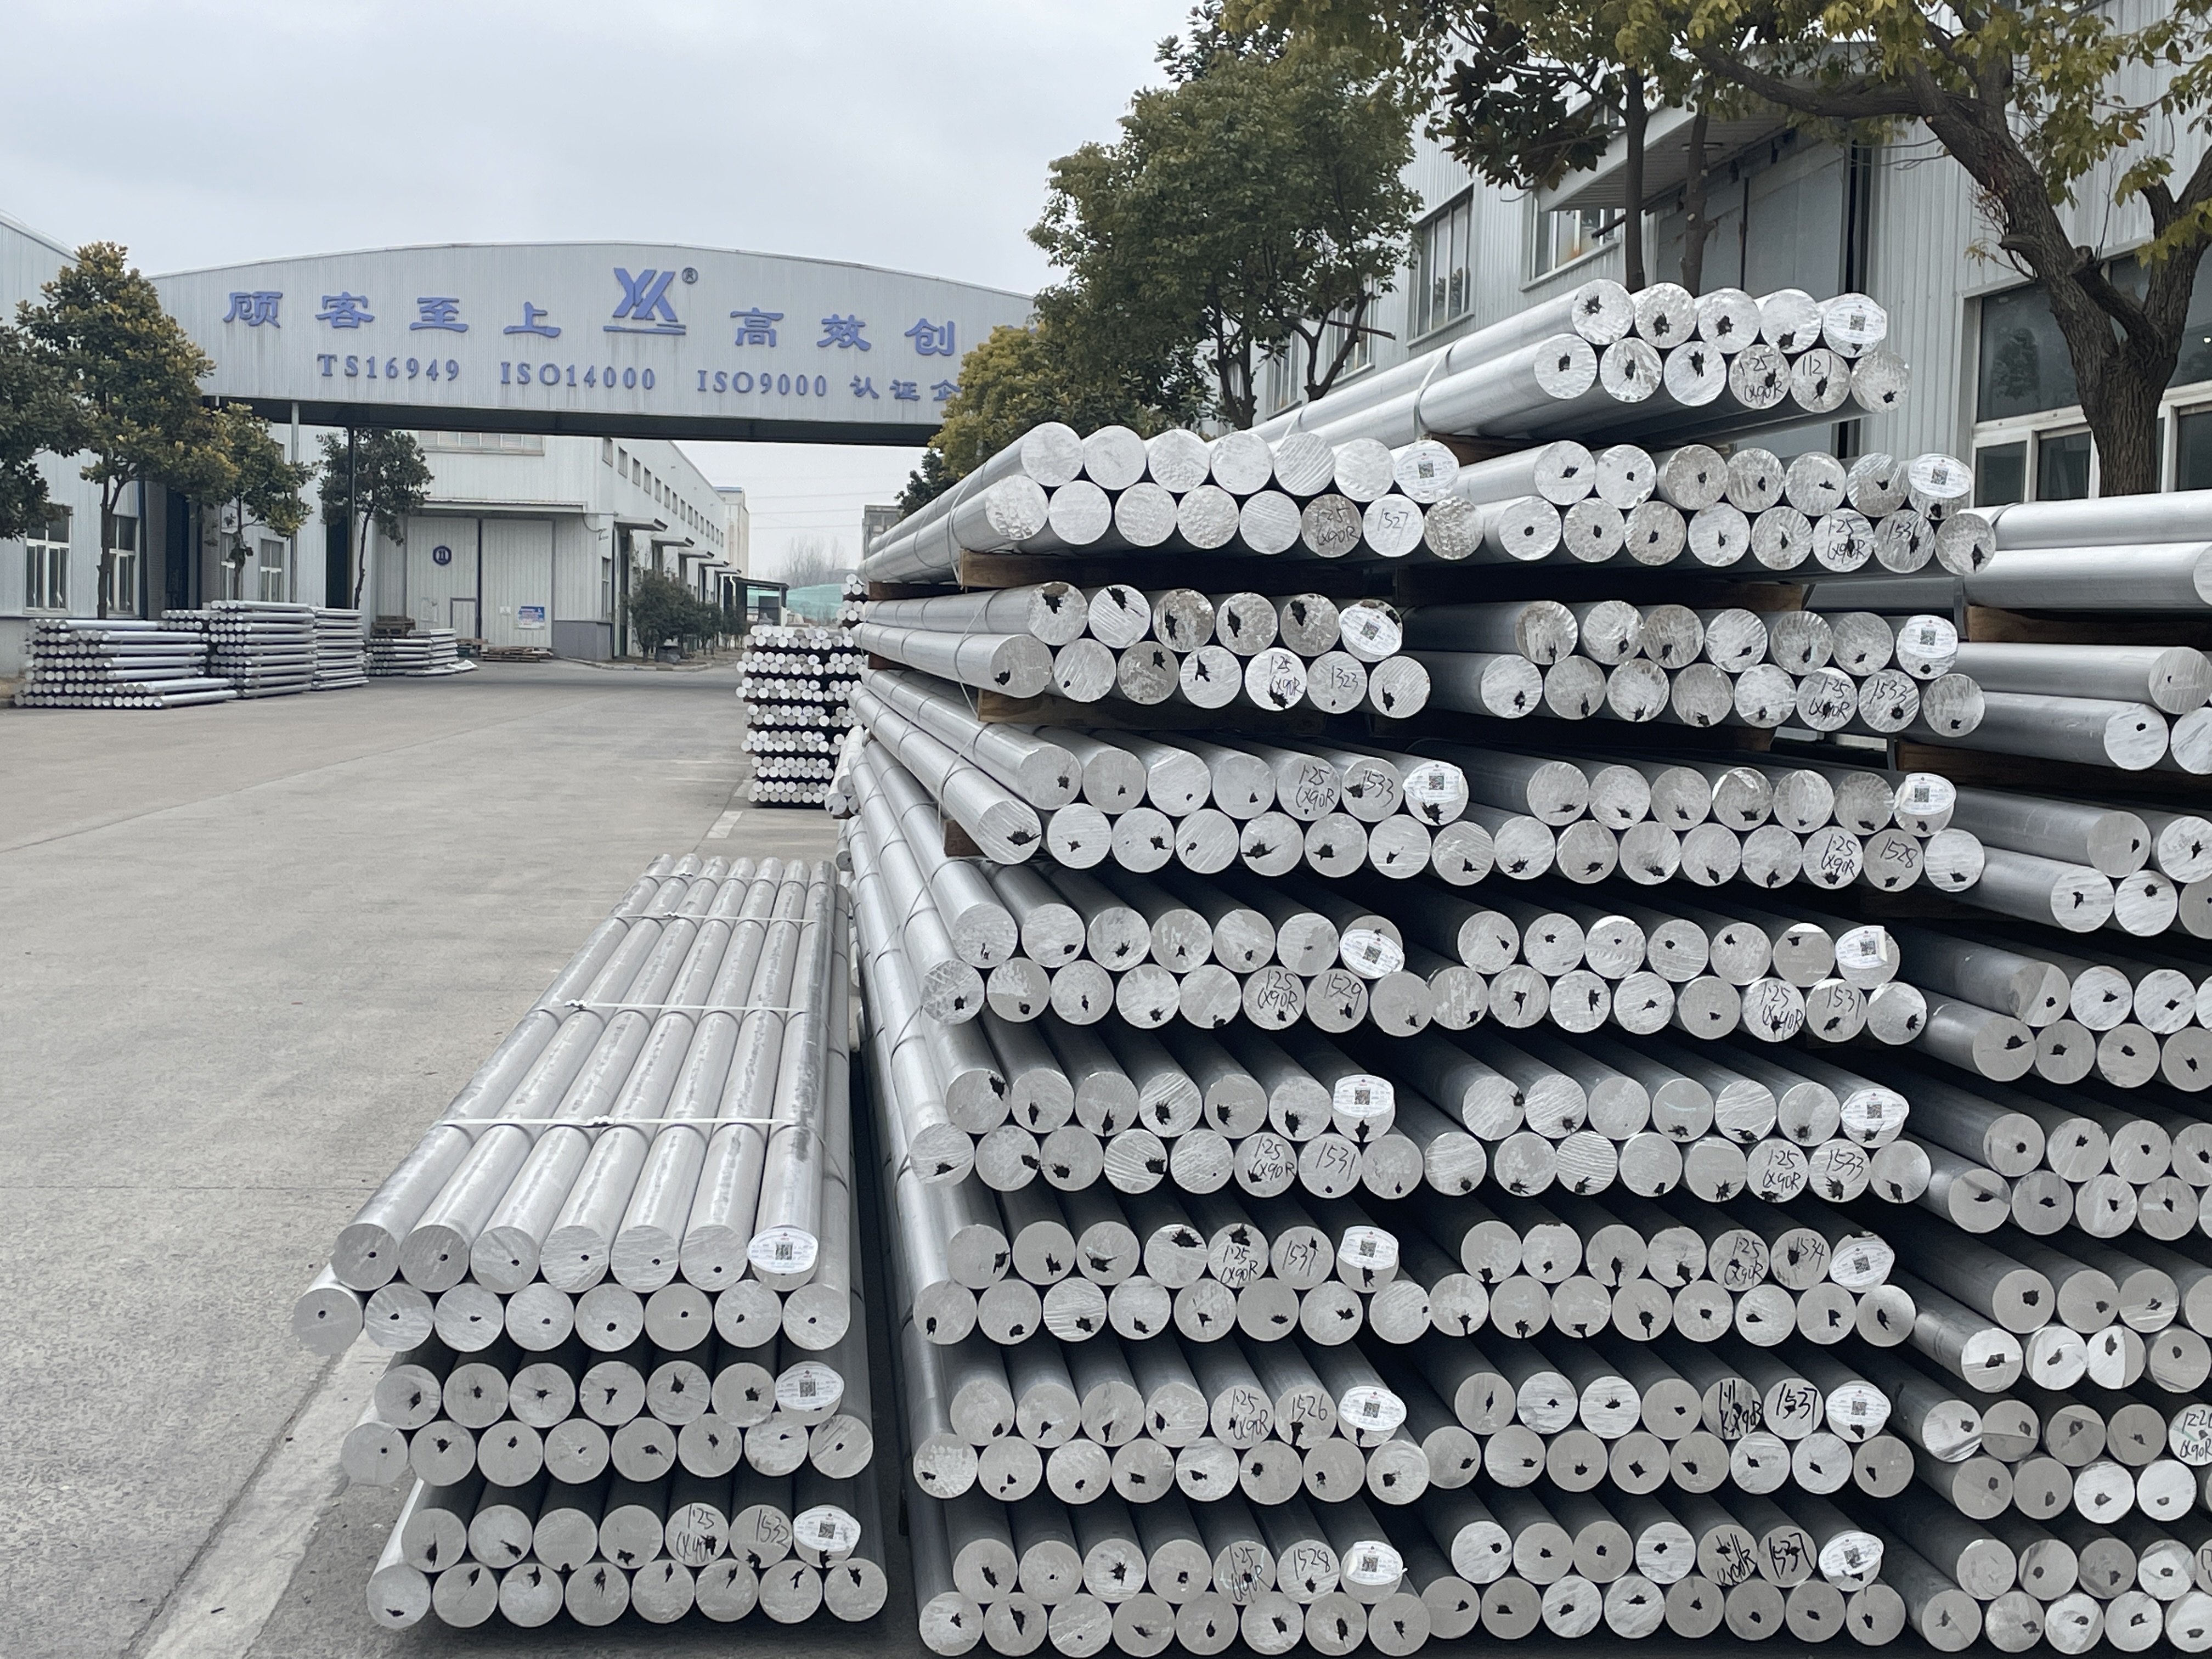 Brazil reduces import duties on primary aluminum, aluminum sheets and aluminum cans by 10%